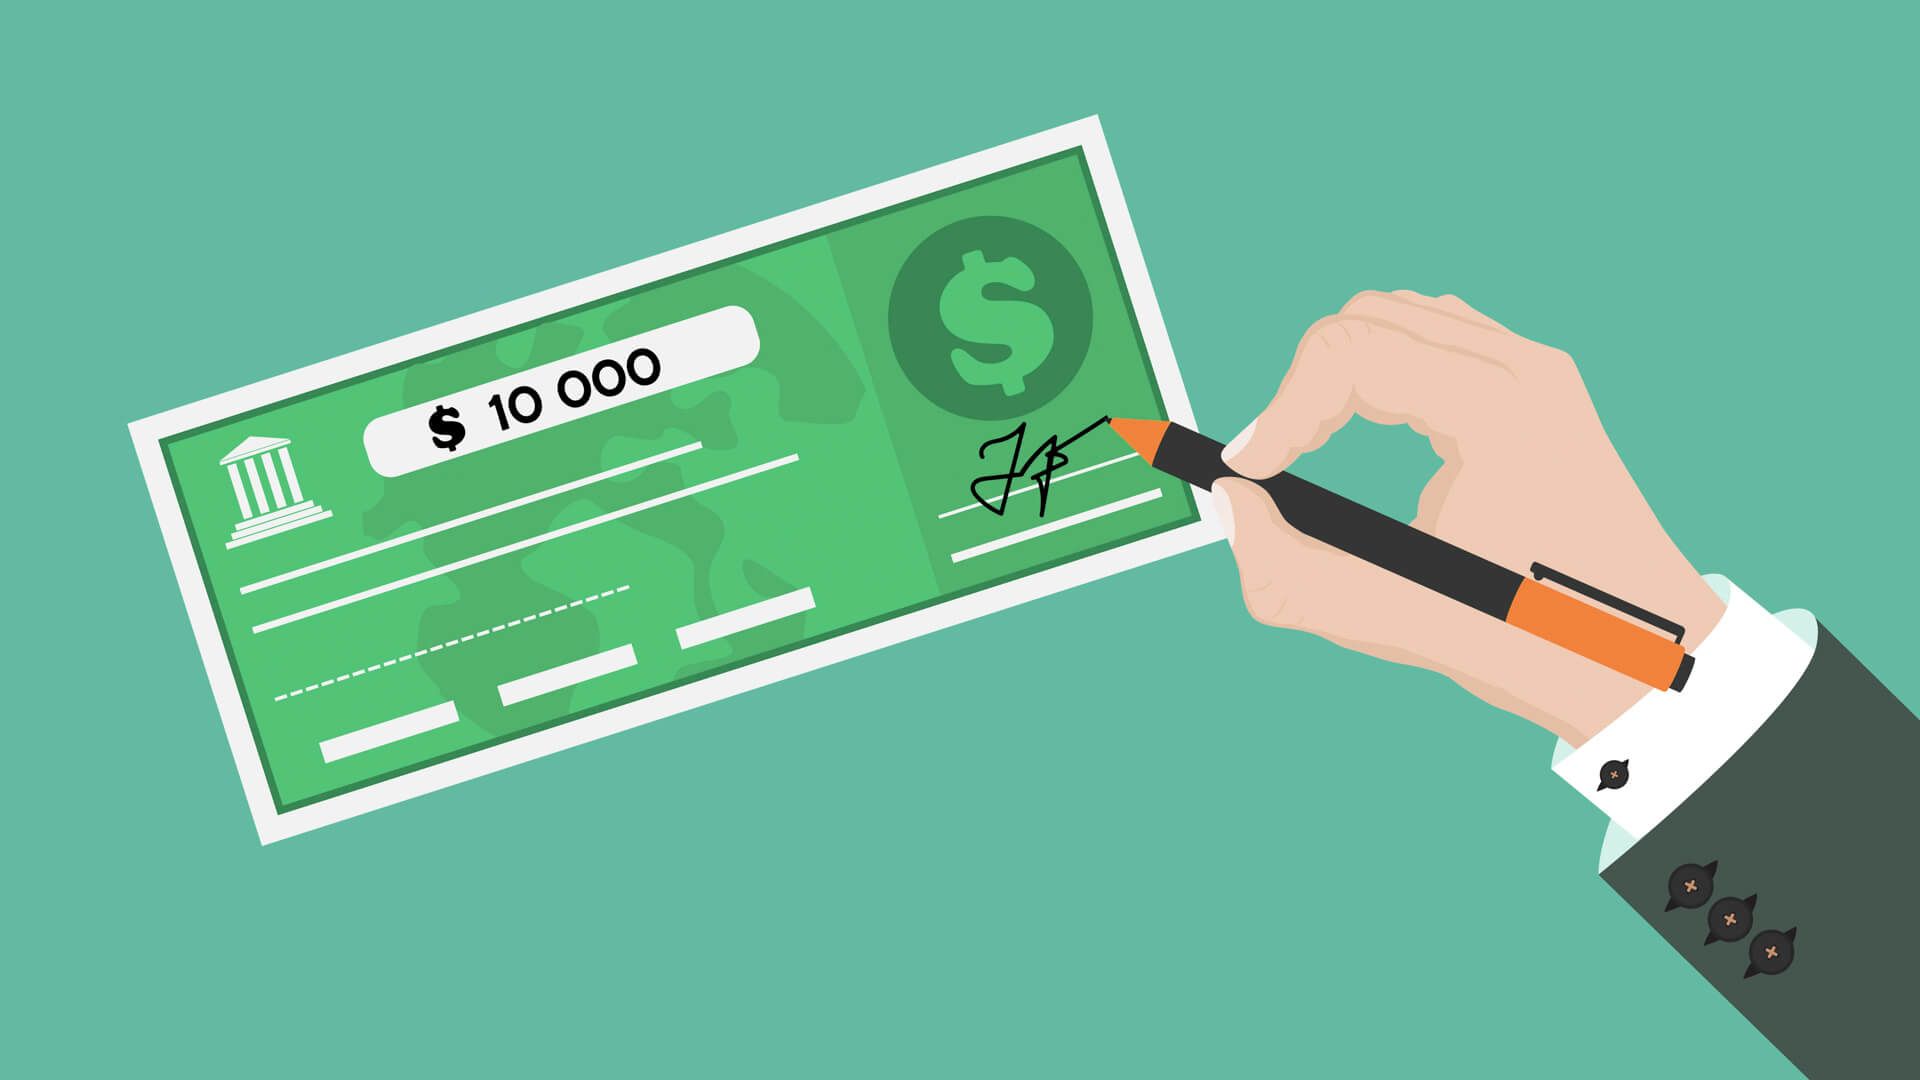 How To Endorse a Check: Step-by-Step Guide (How To Sign